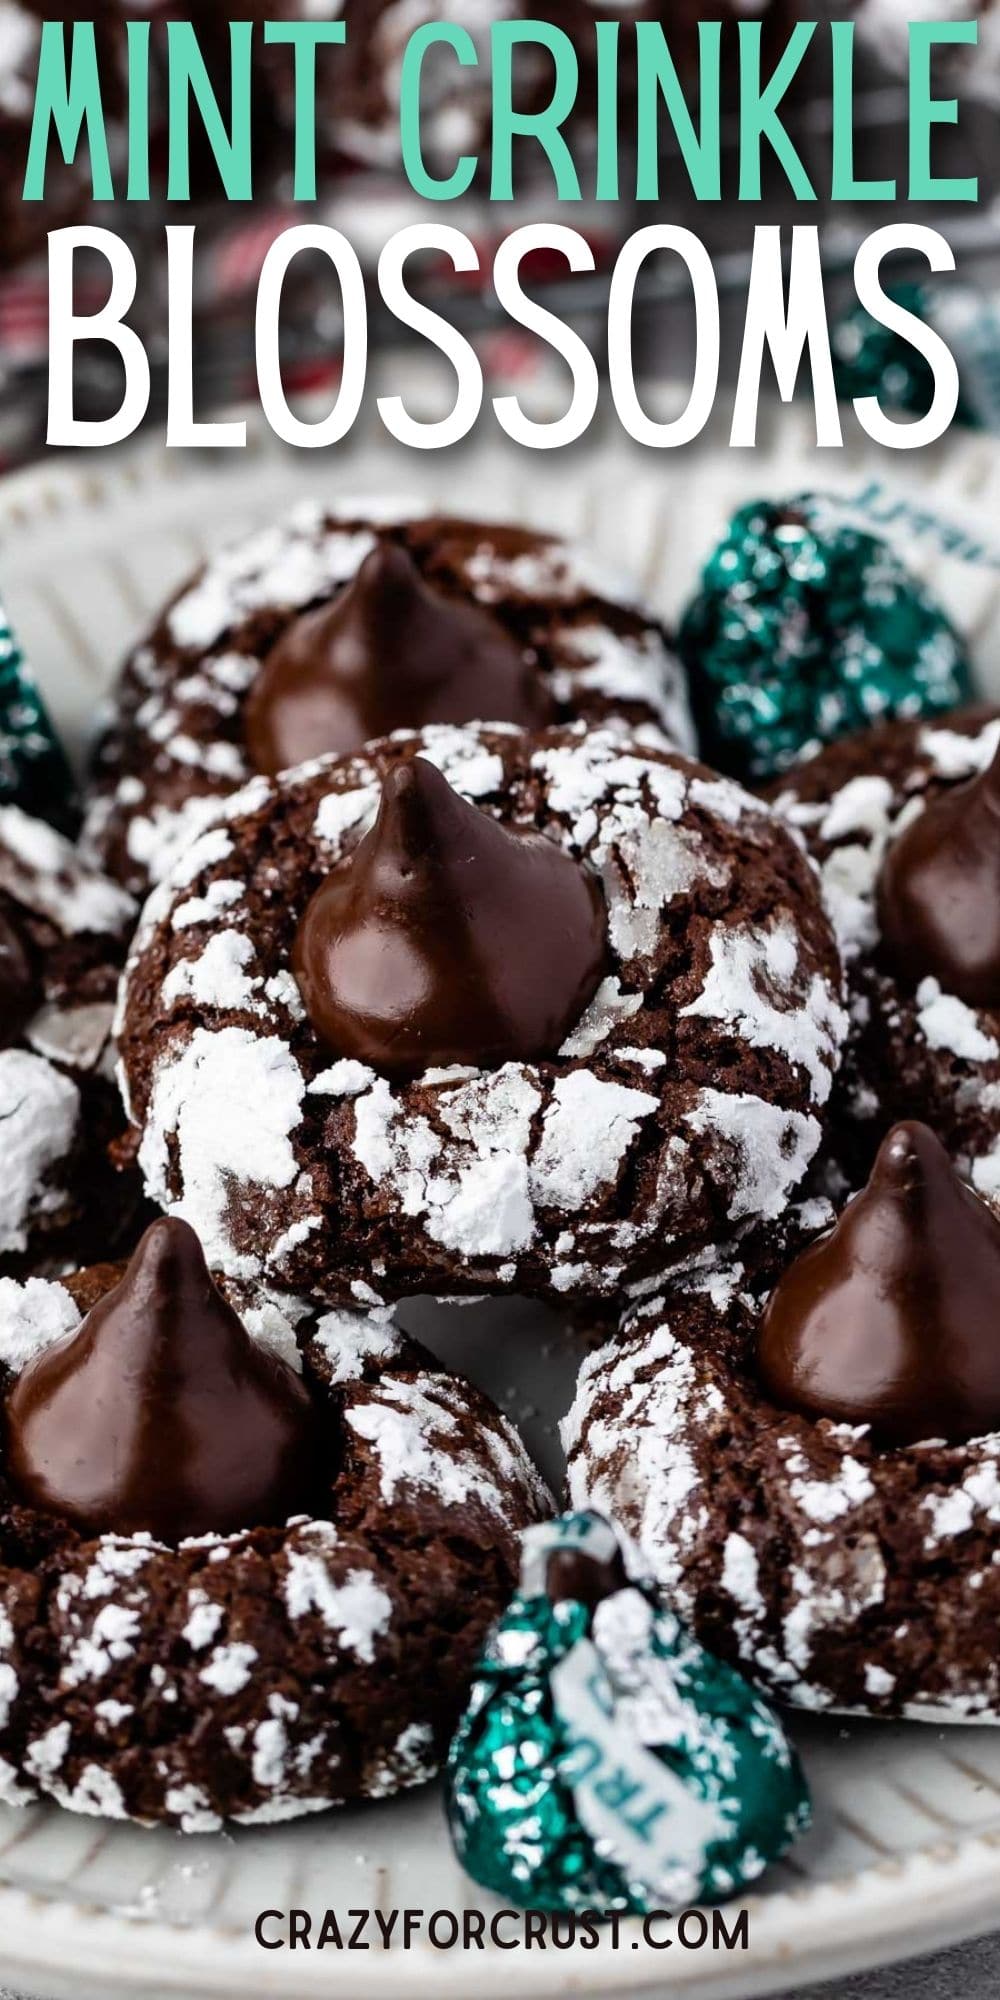 Close up shot of chocolate mint kiss crinkles with recipe title on top of image